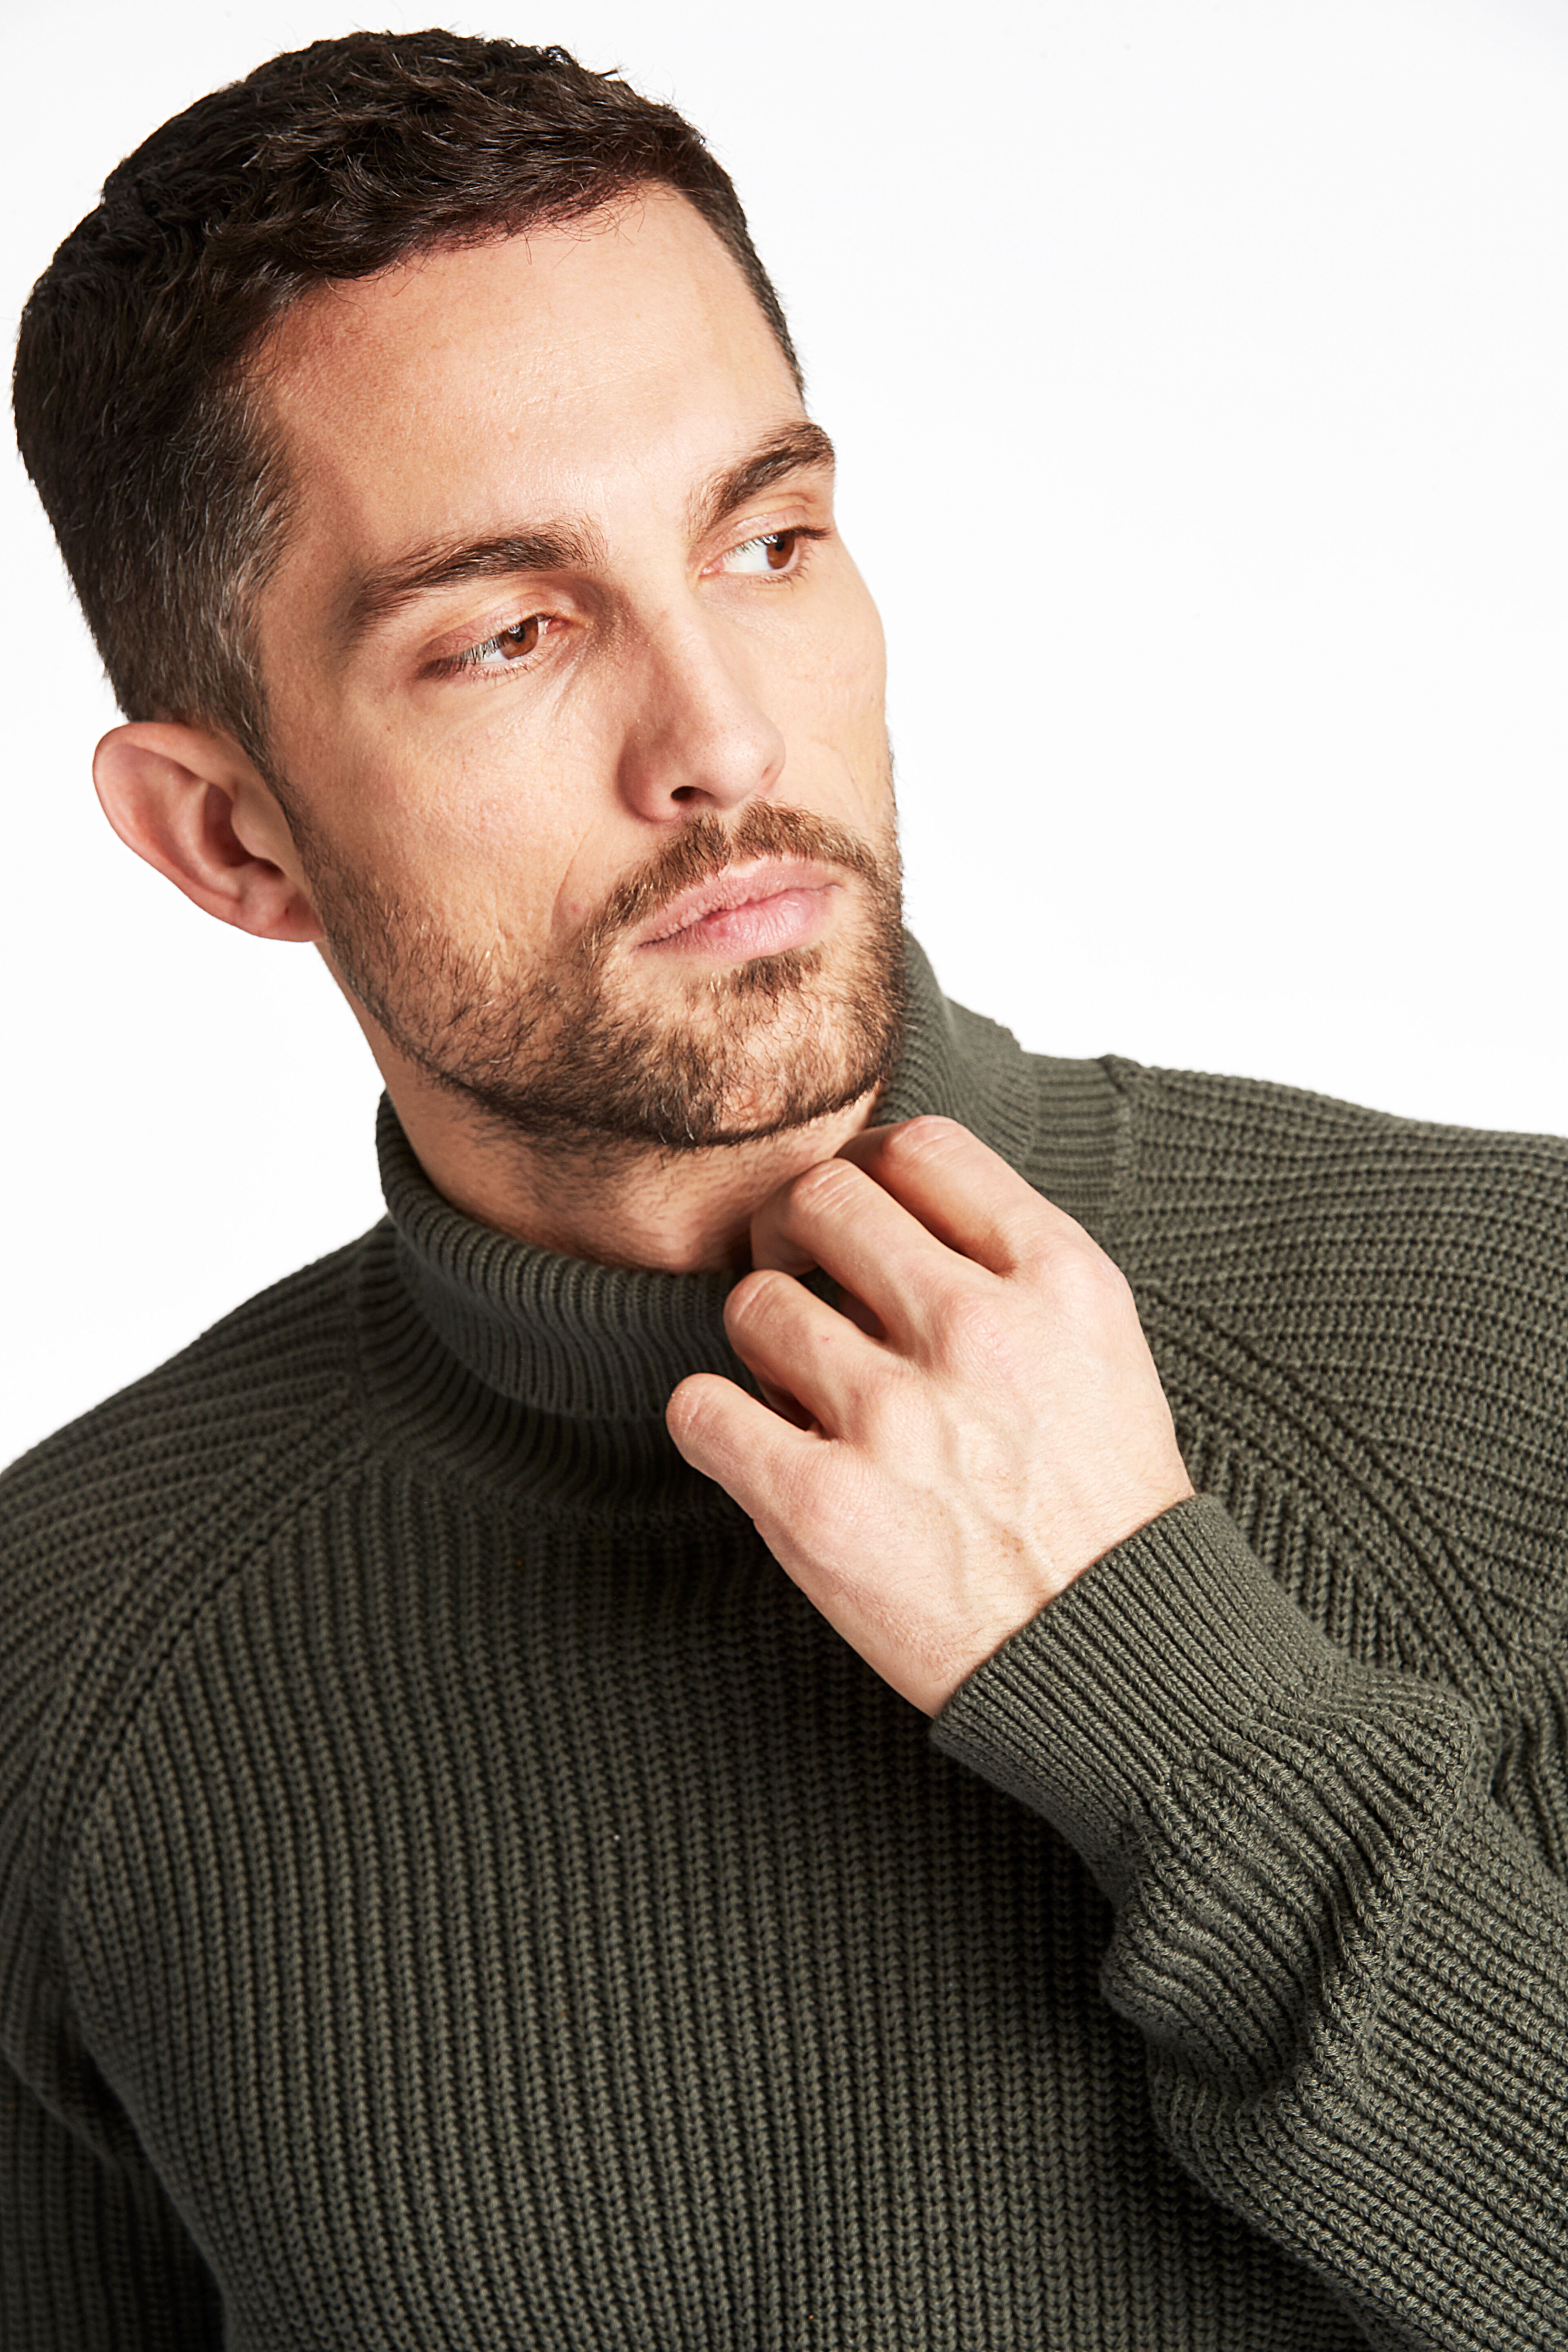 Turtle neck | Relaxed fit 30-824028